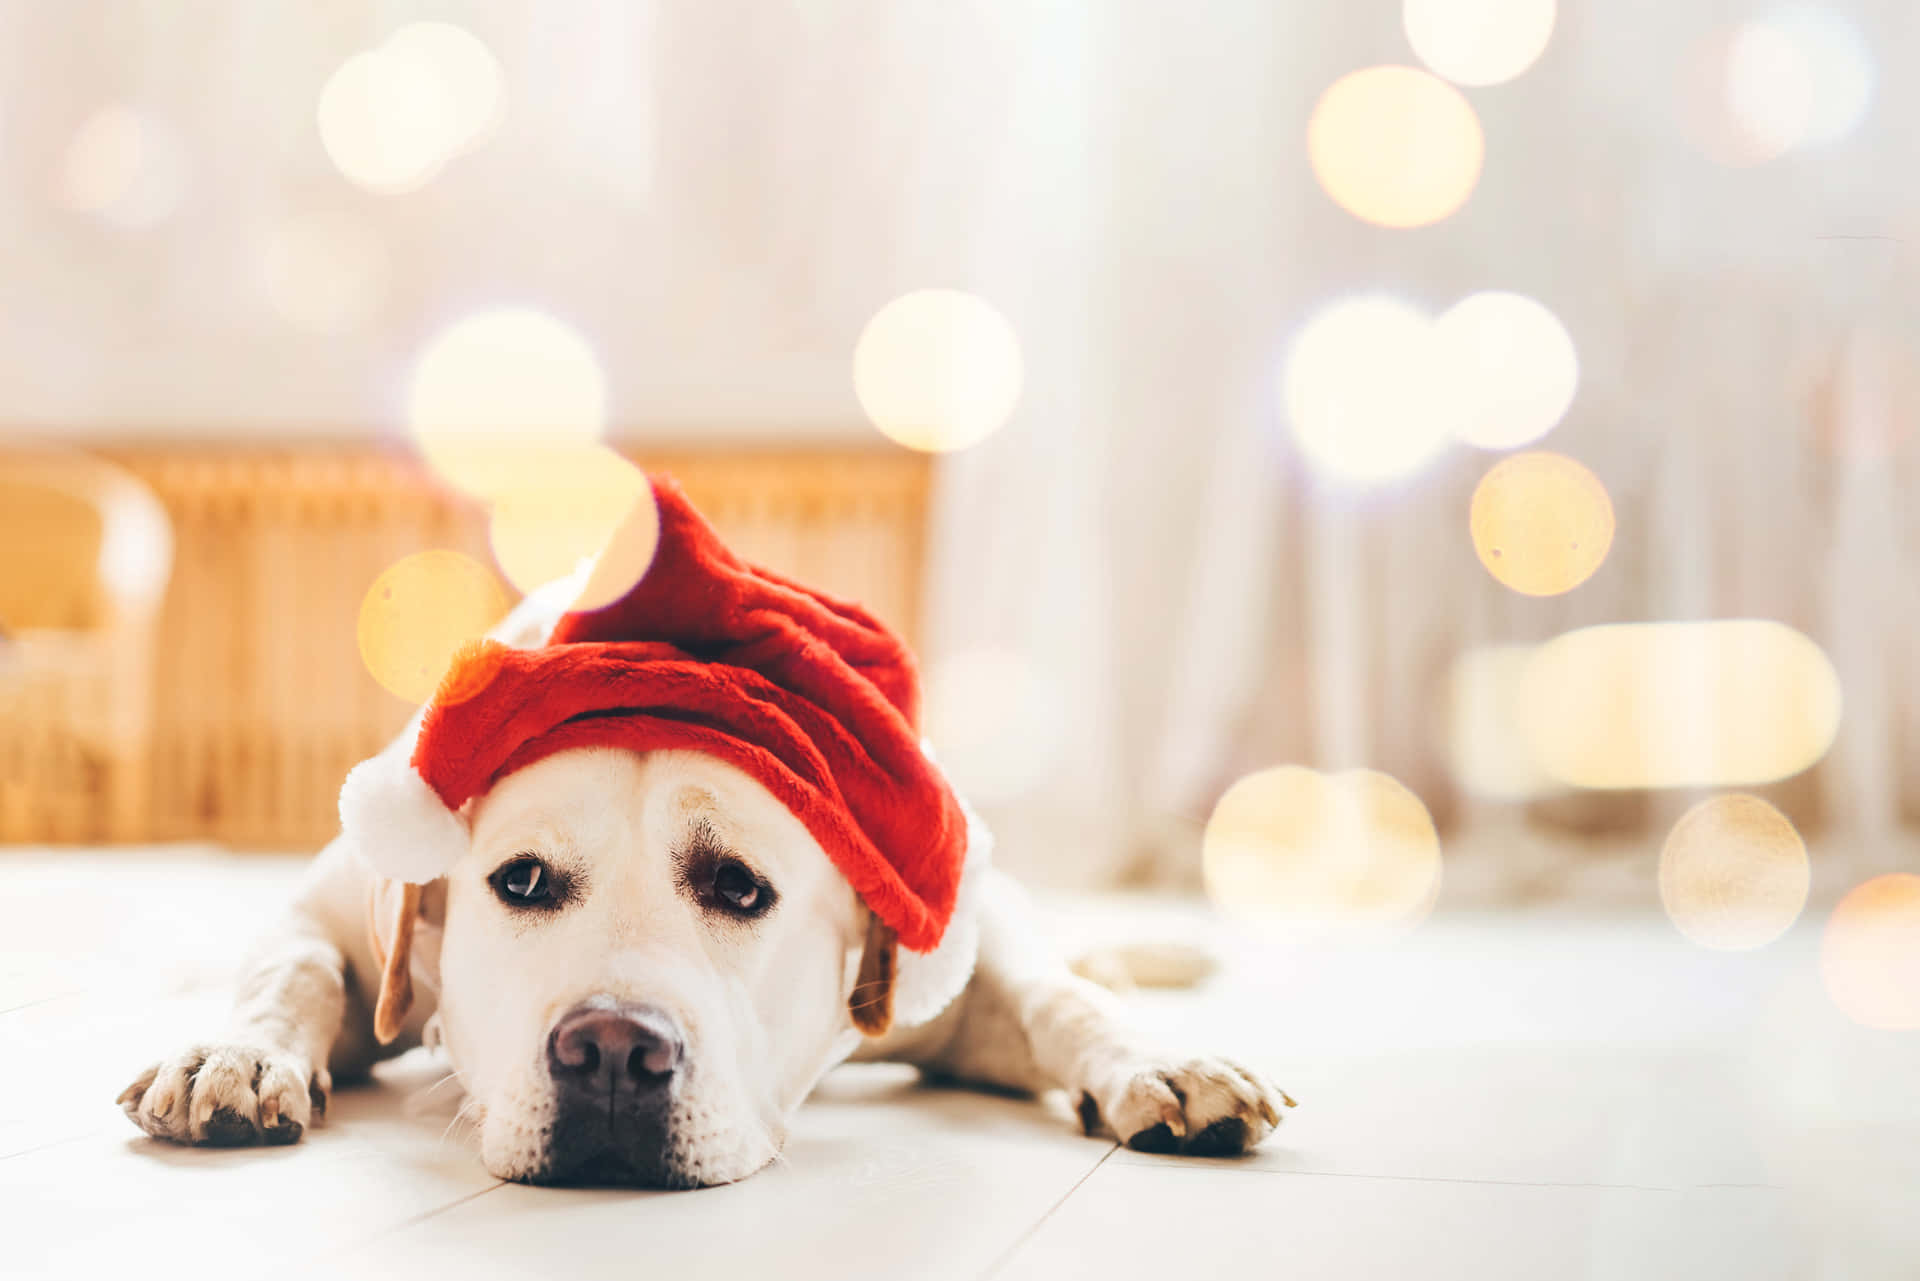 A Dog Wearing A Santa Hat On The Floor